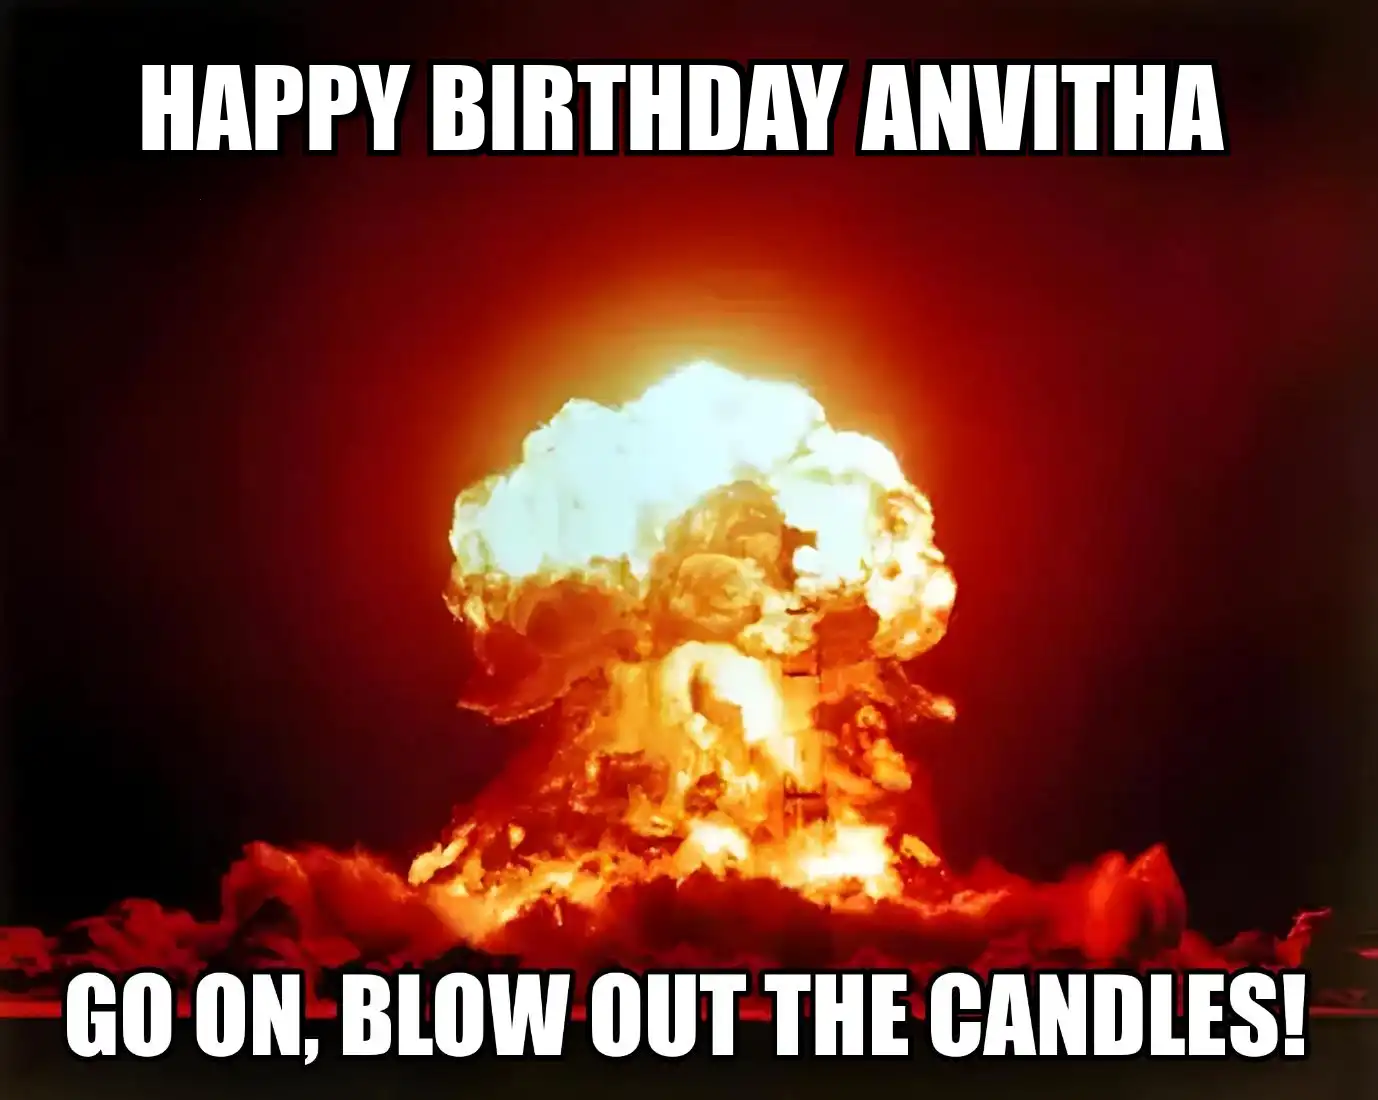 Happy Birthday Anvitha Go On Blow Out The Candles Meme